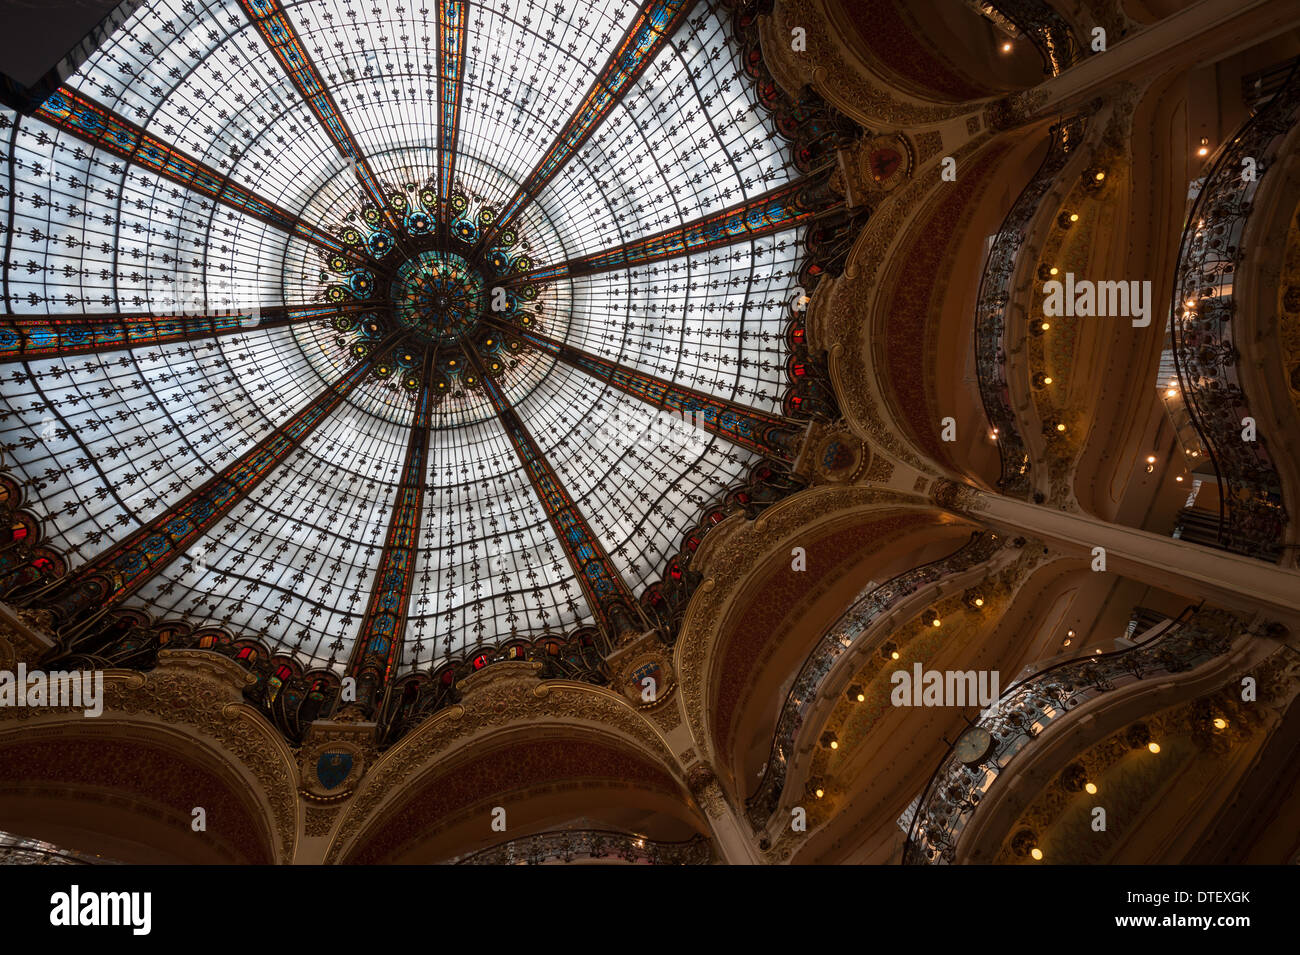 Cupola ceiling to the iconic Galerie Lafayette department store Stock Photo